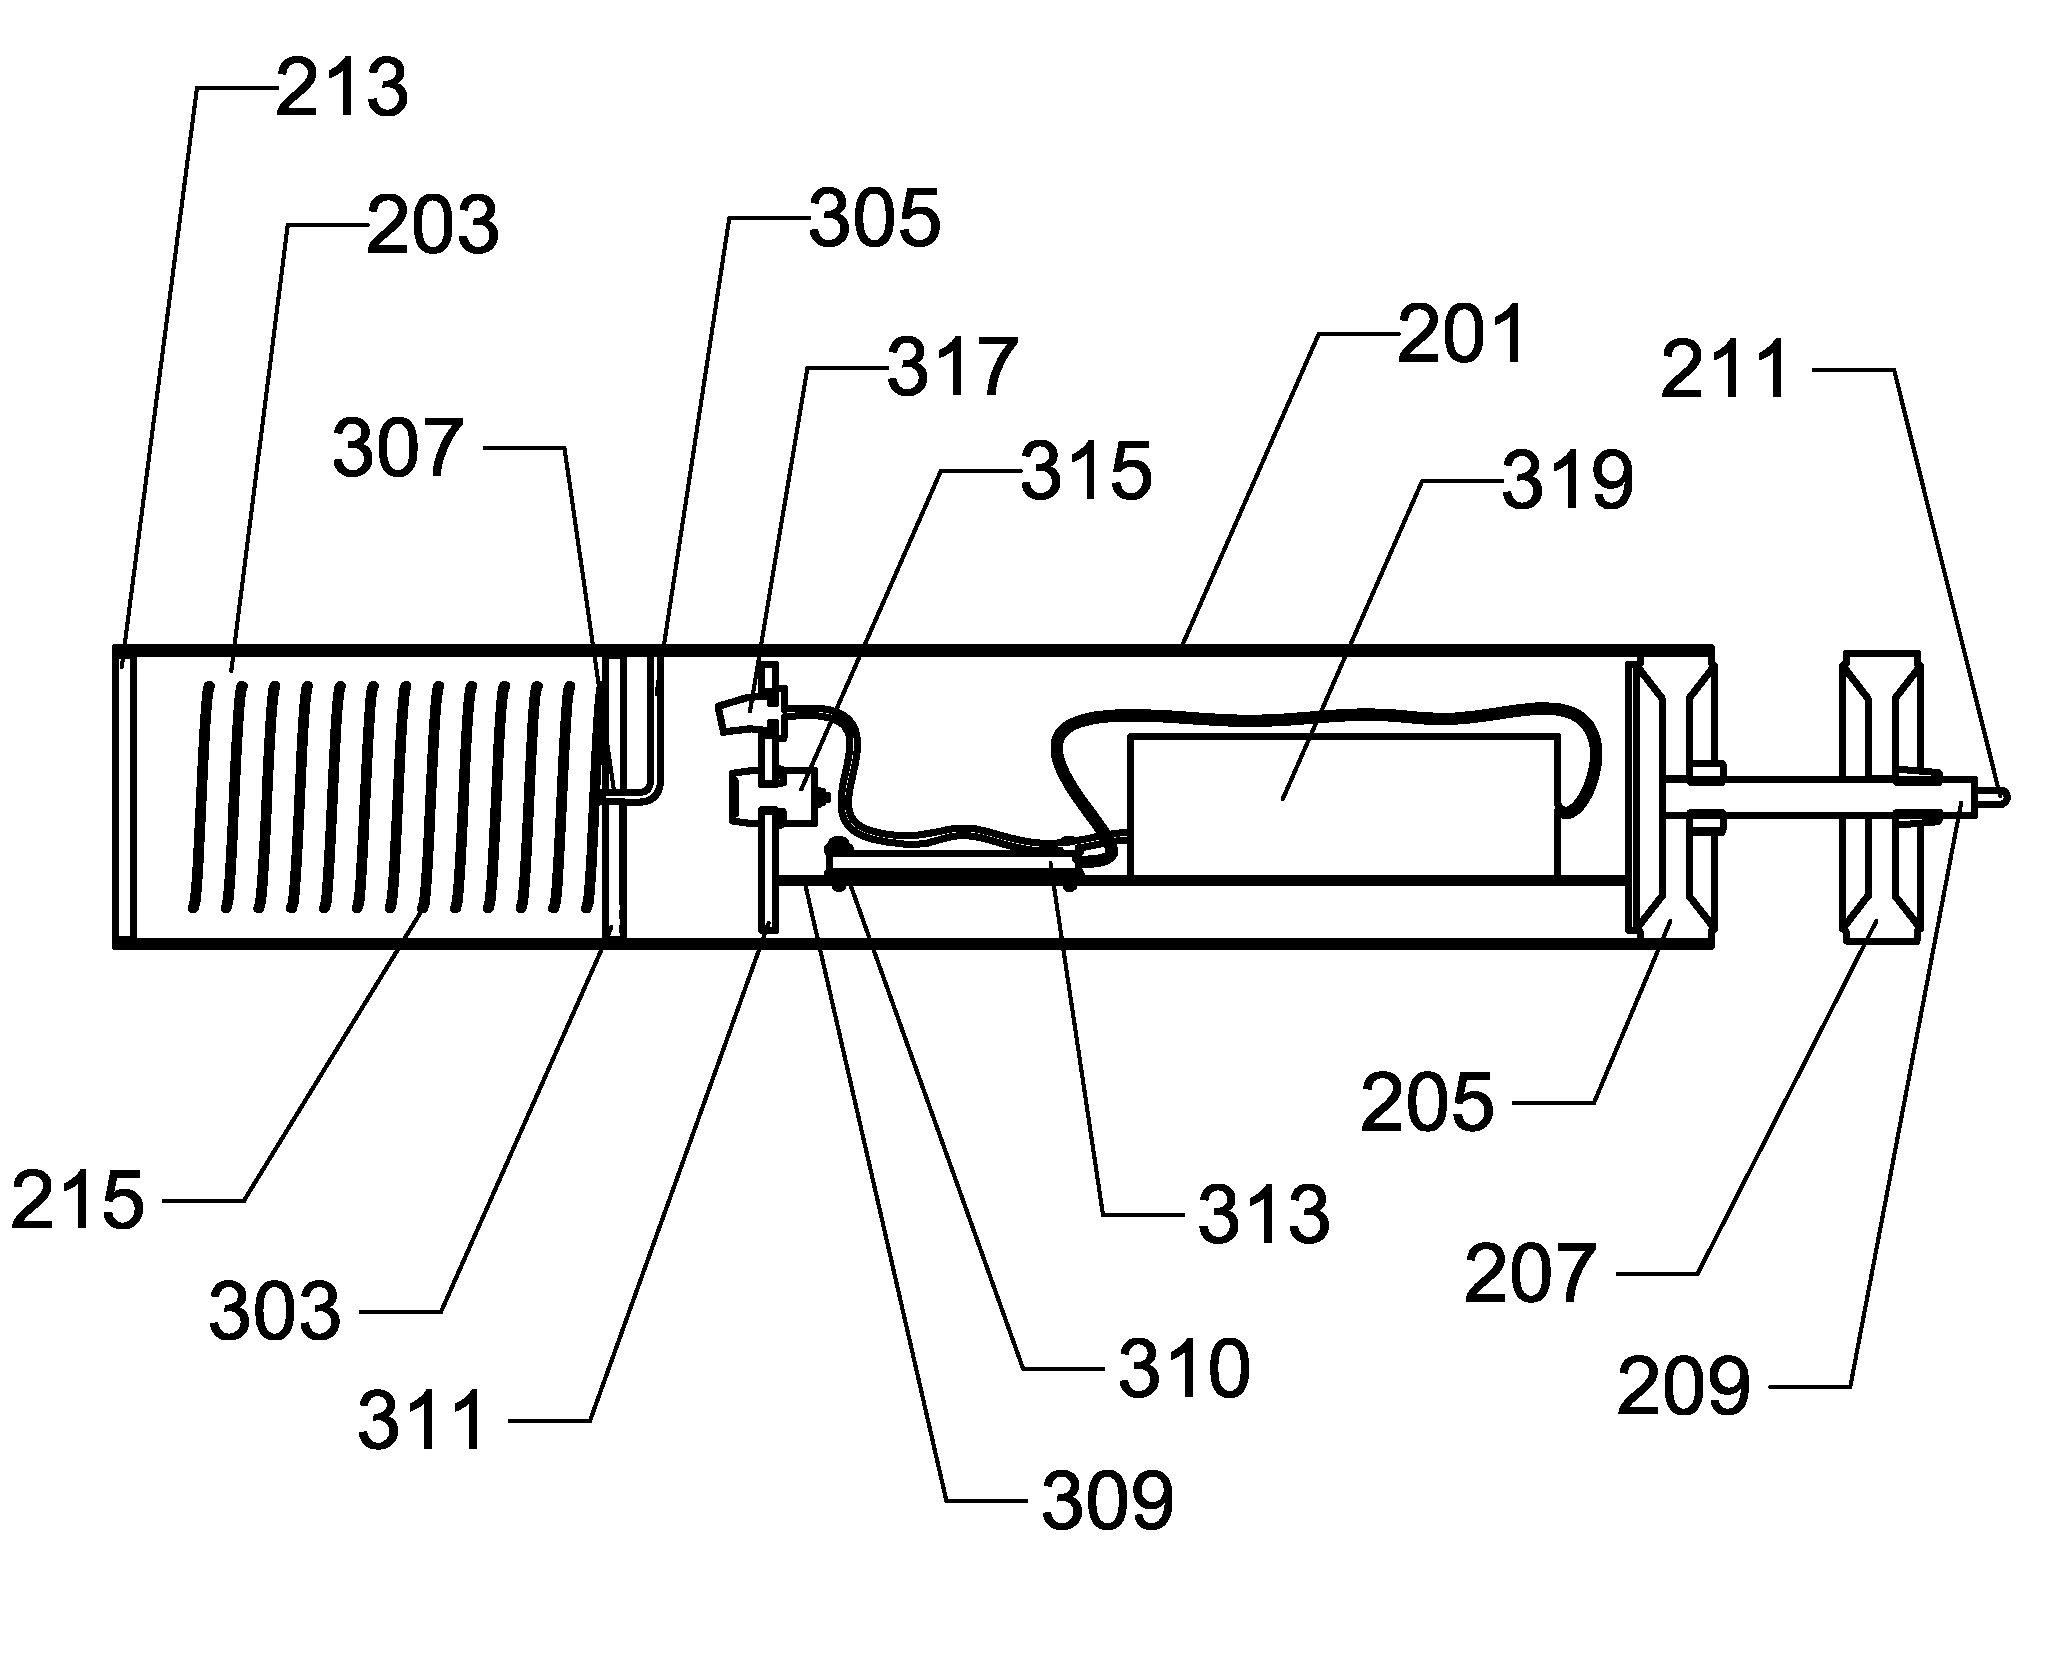 Microwave Linked Laser Control System and Apparatus for Drilling and Boring Operations